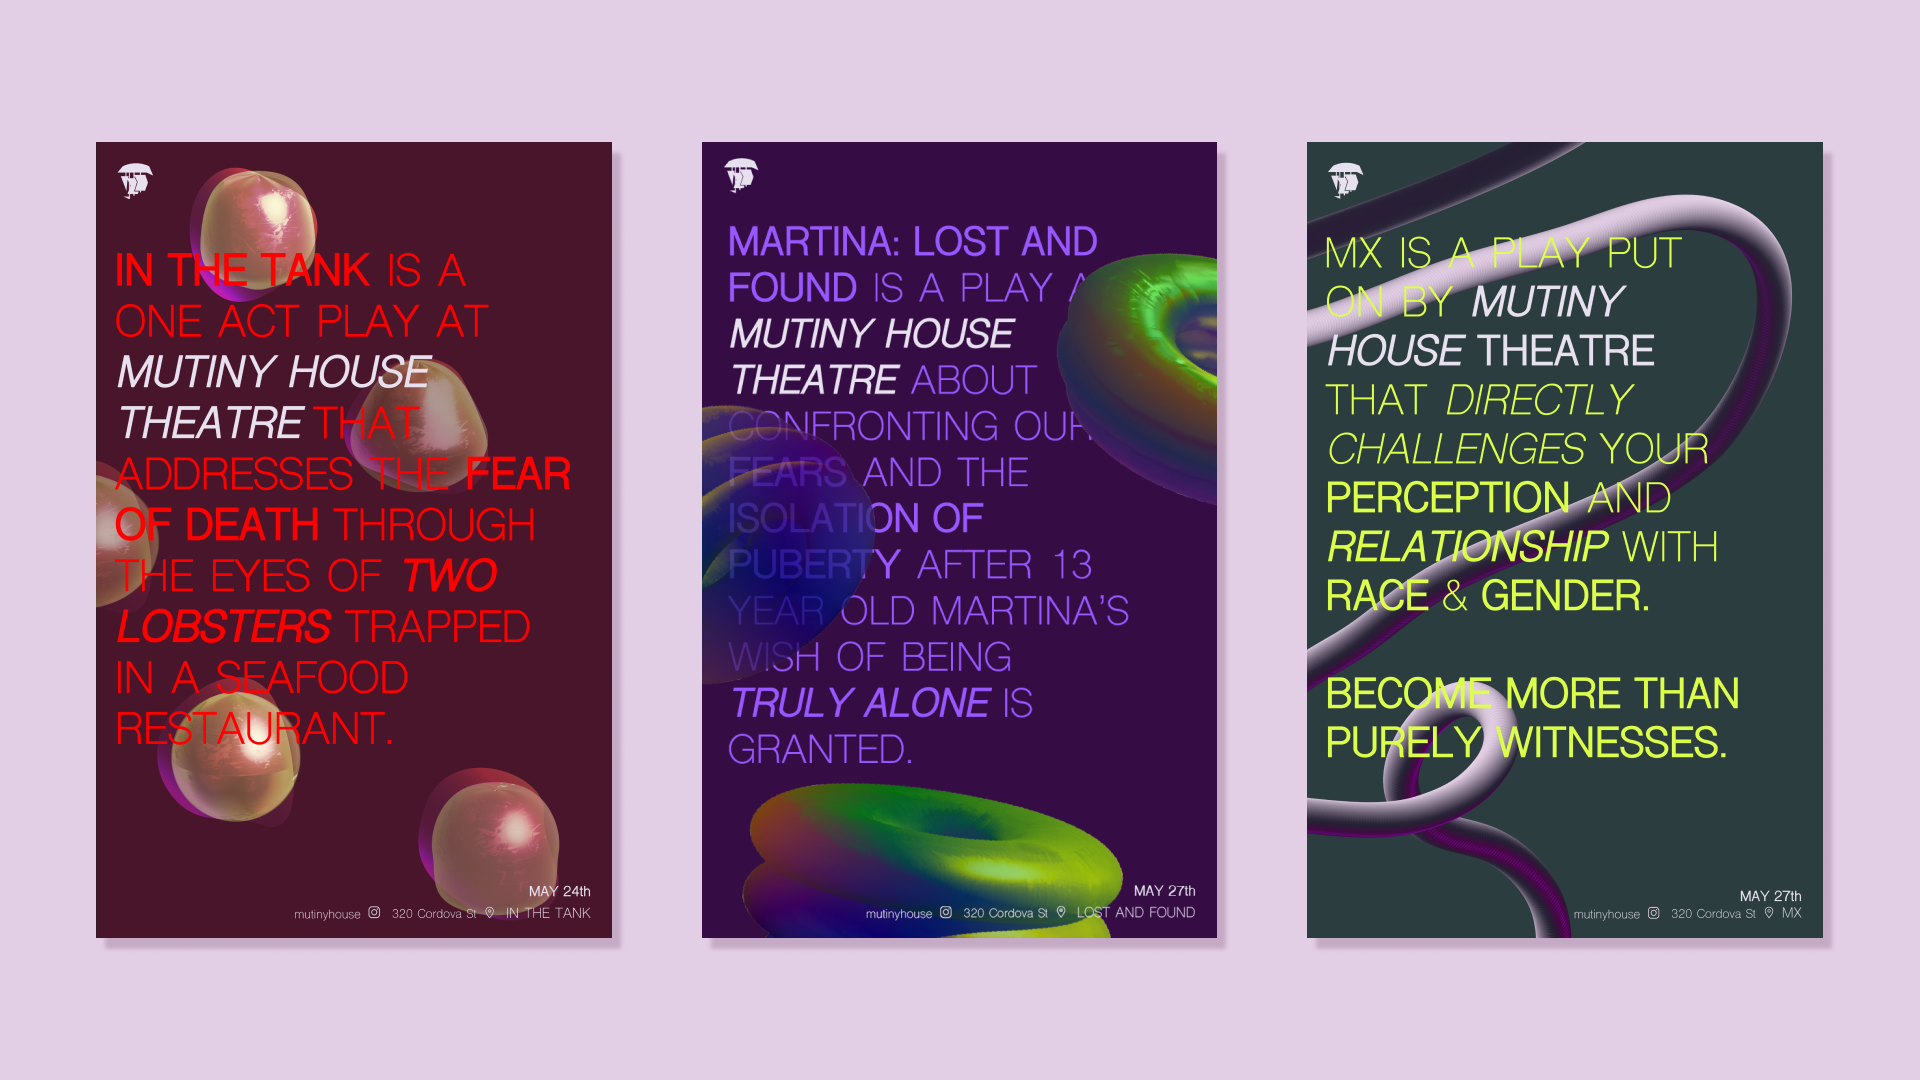 3 posters sit staggered on a dark mauve background and the company logo sits in the bottom corner of the image. The posters summarize 3 different plays, “In the Tank,” “Martina, Lost and Found,” and “Mx.” Each poster is a combination of text and 3D graphic shapes.